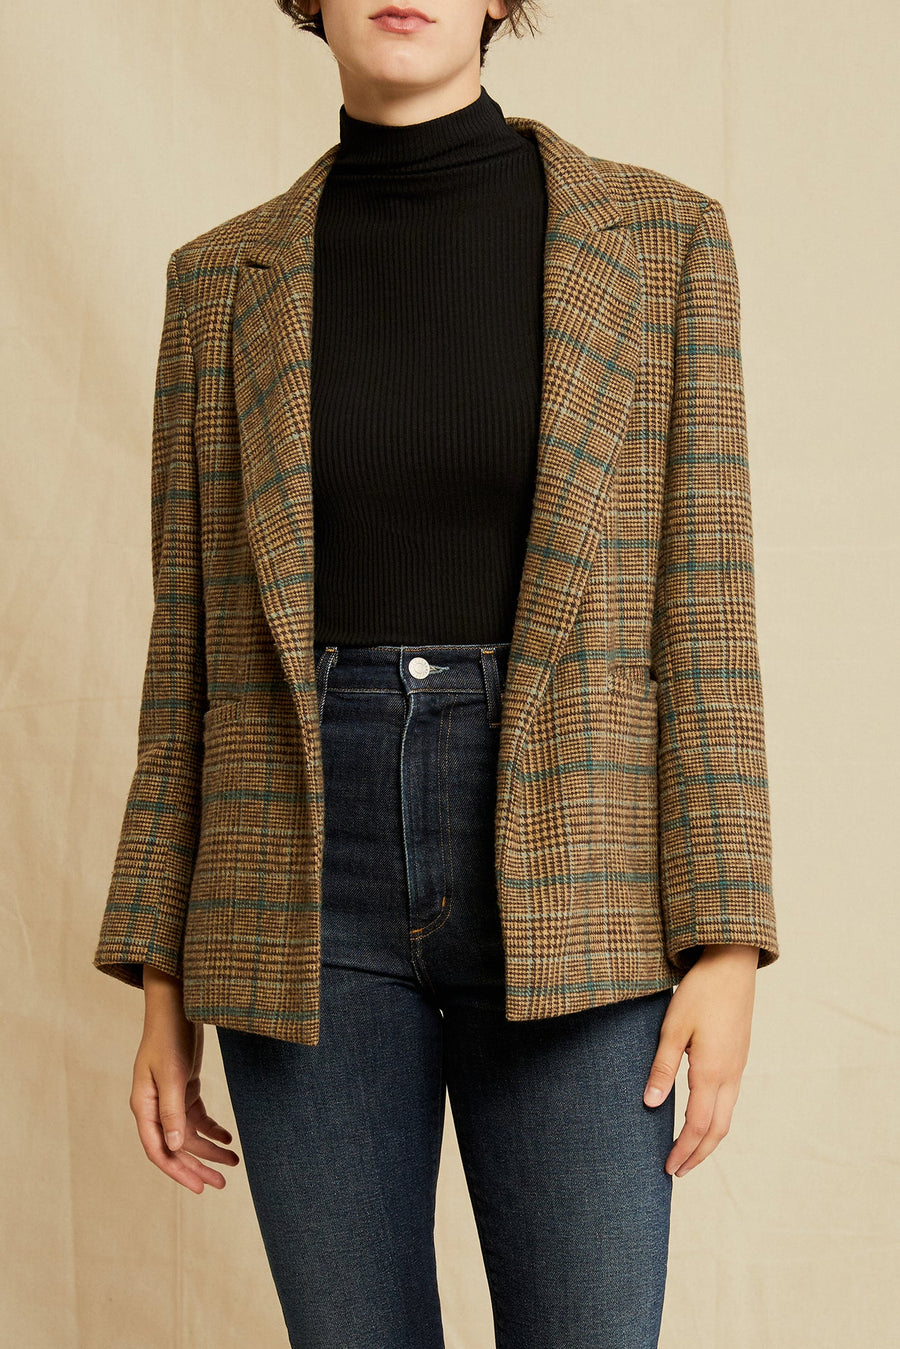 Brown and Teal Plaid